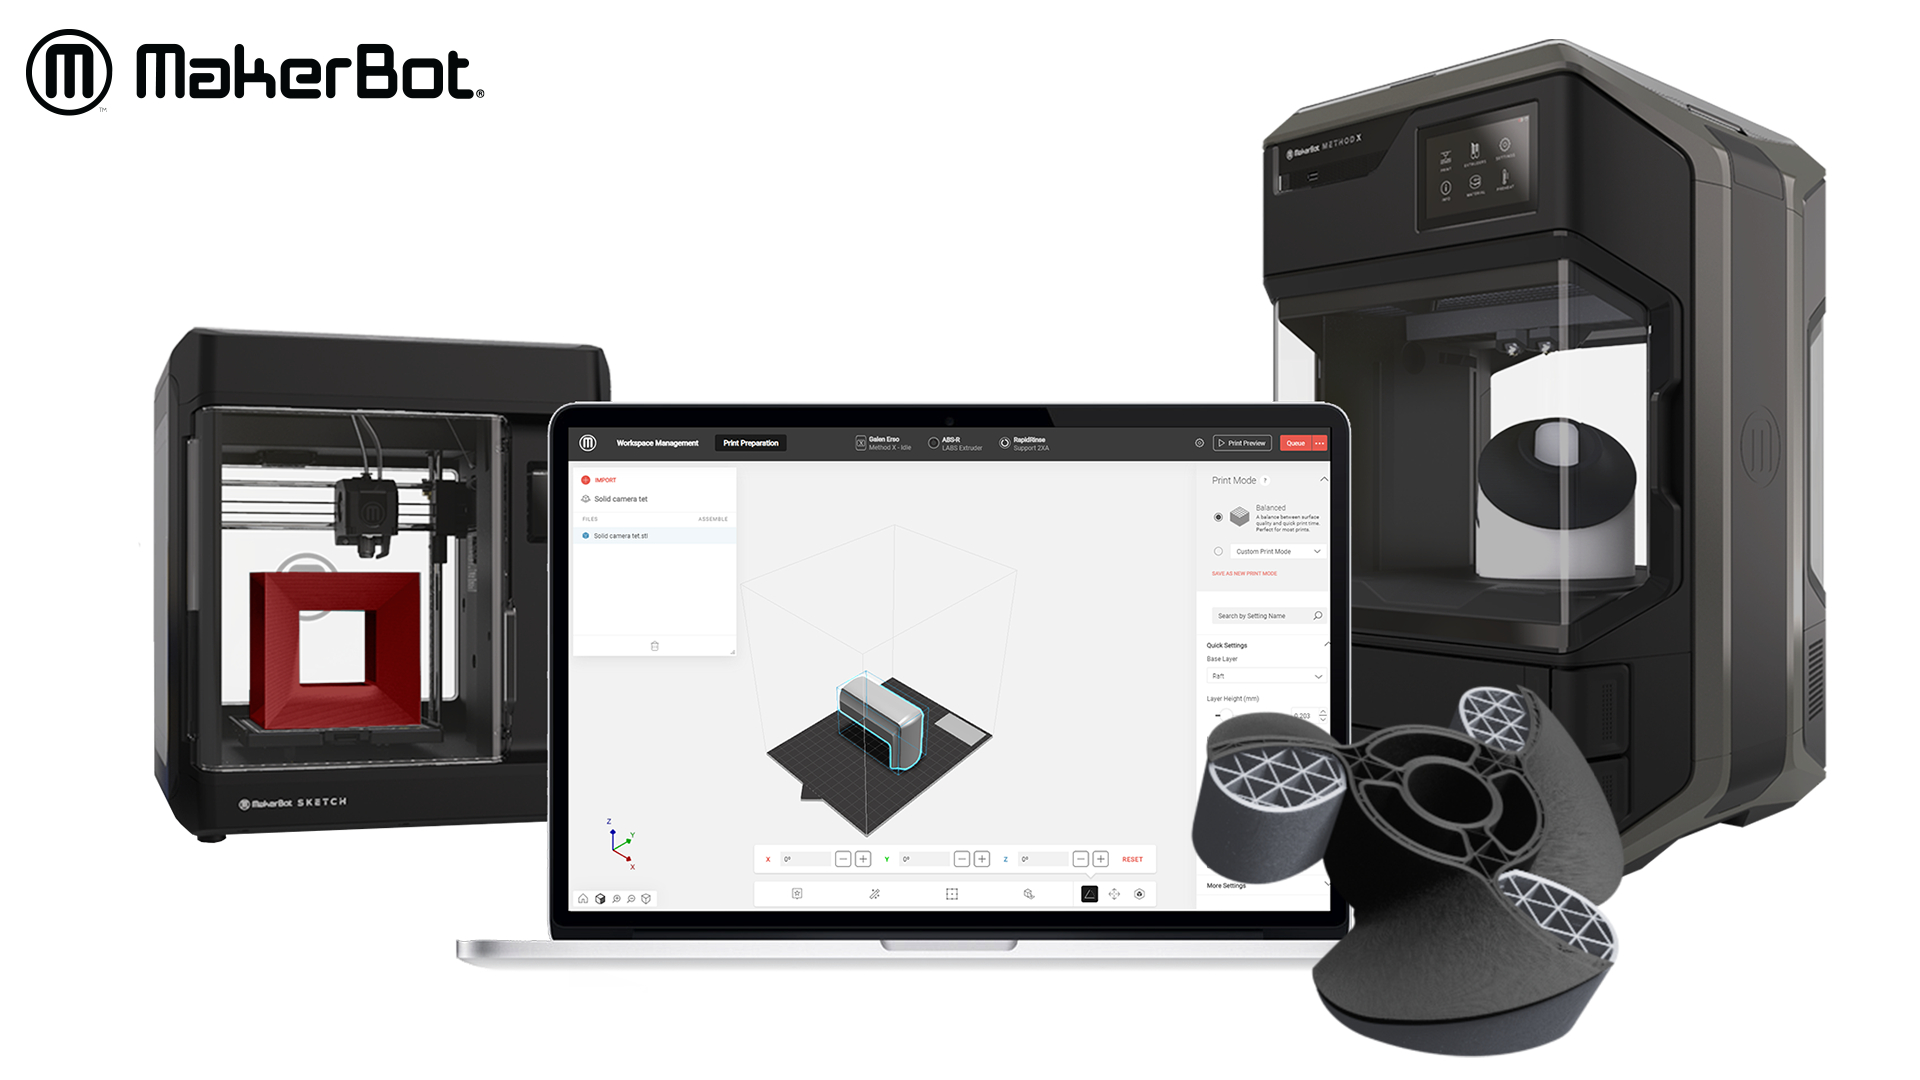 MakerBot CloudPrint provides a strengthened 3D printing workflow and several new and upgrades features that enable users boost productivity.